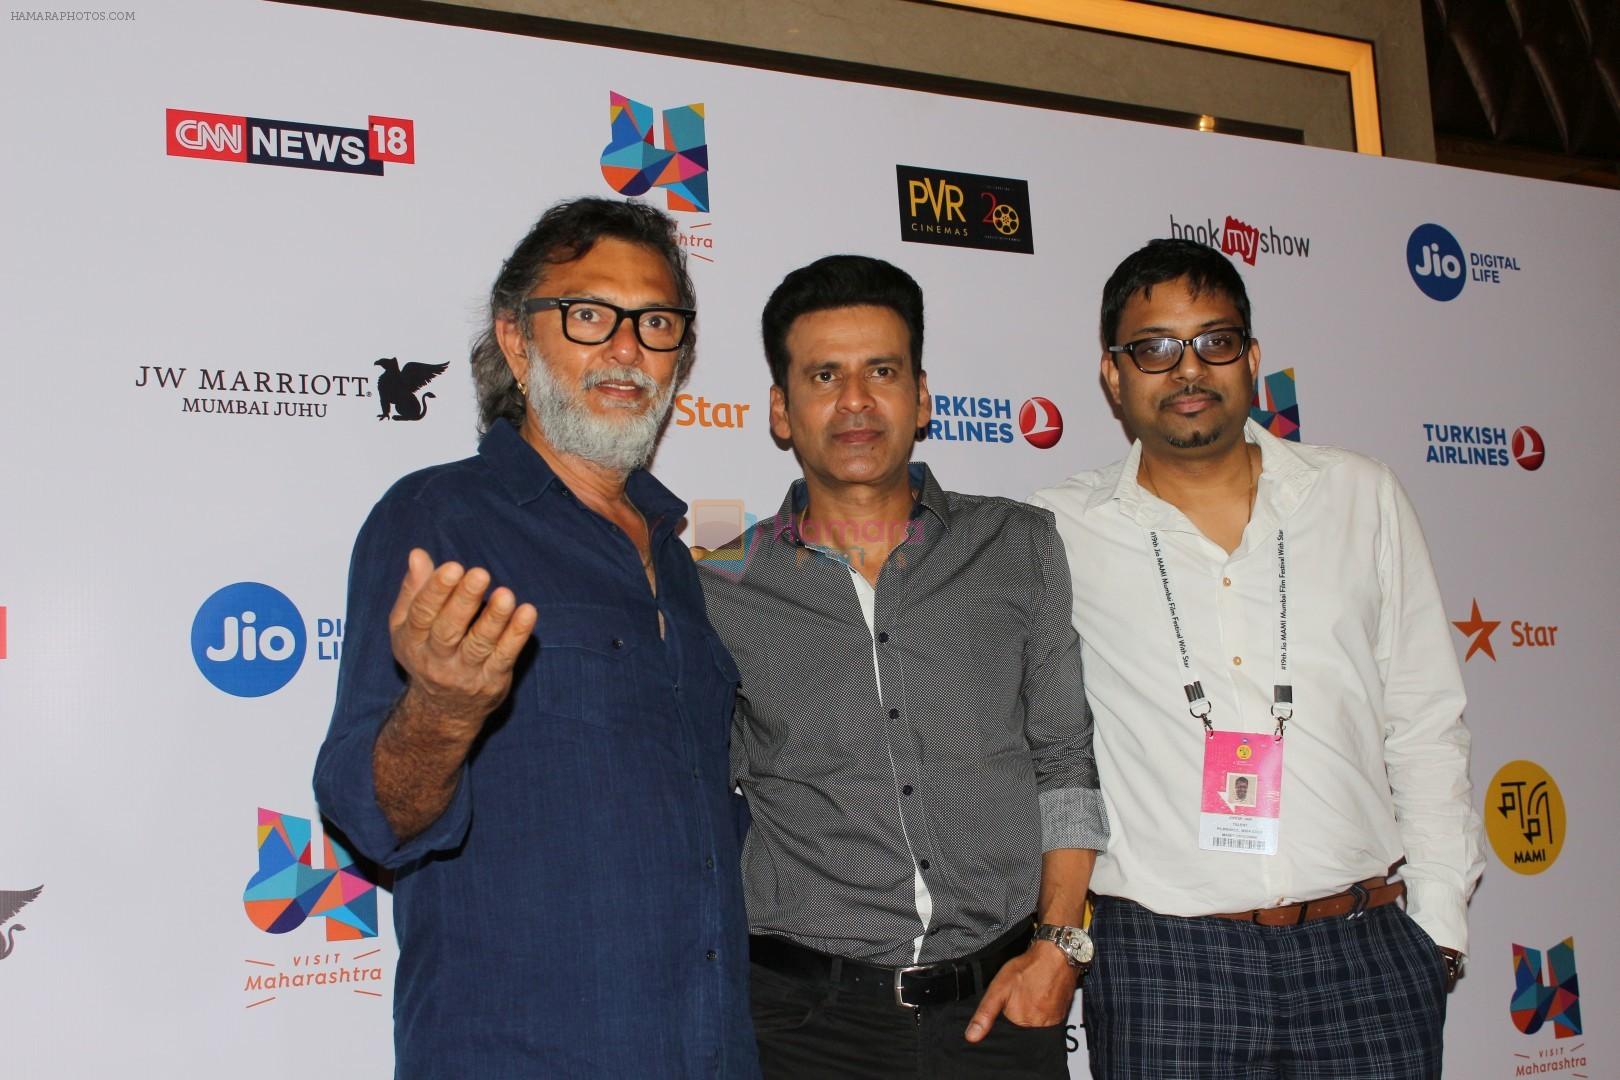 Manoj Bajpai 's First International Project In The Shadows To Be Screened At Mami Festival on 16th Oct 2017